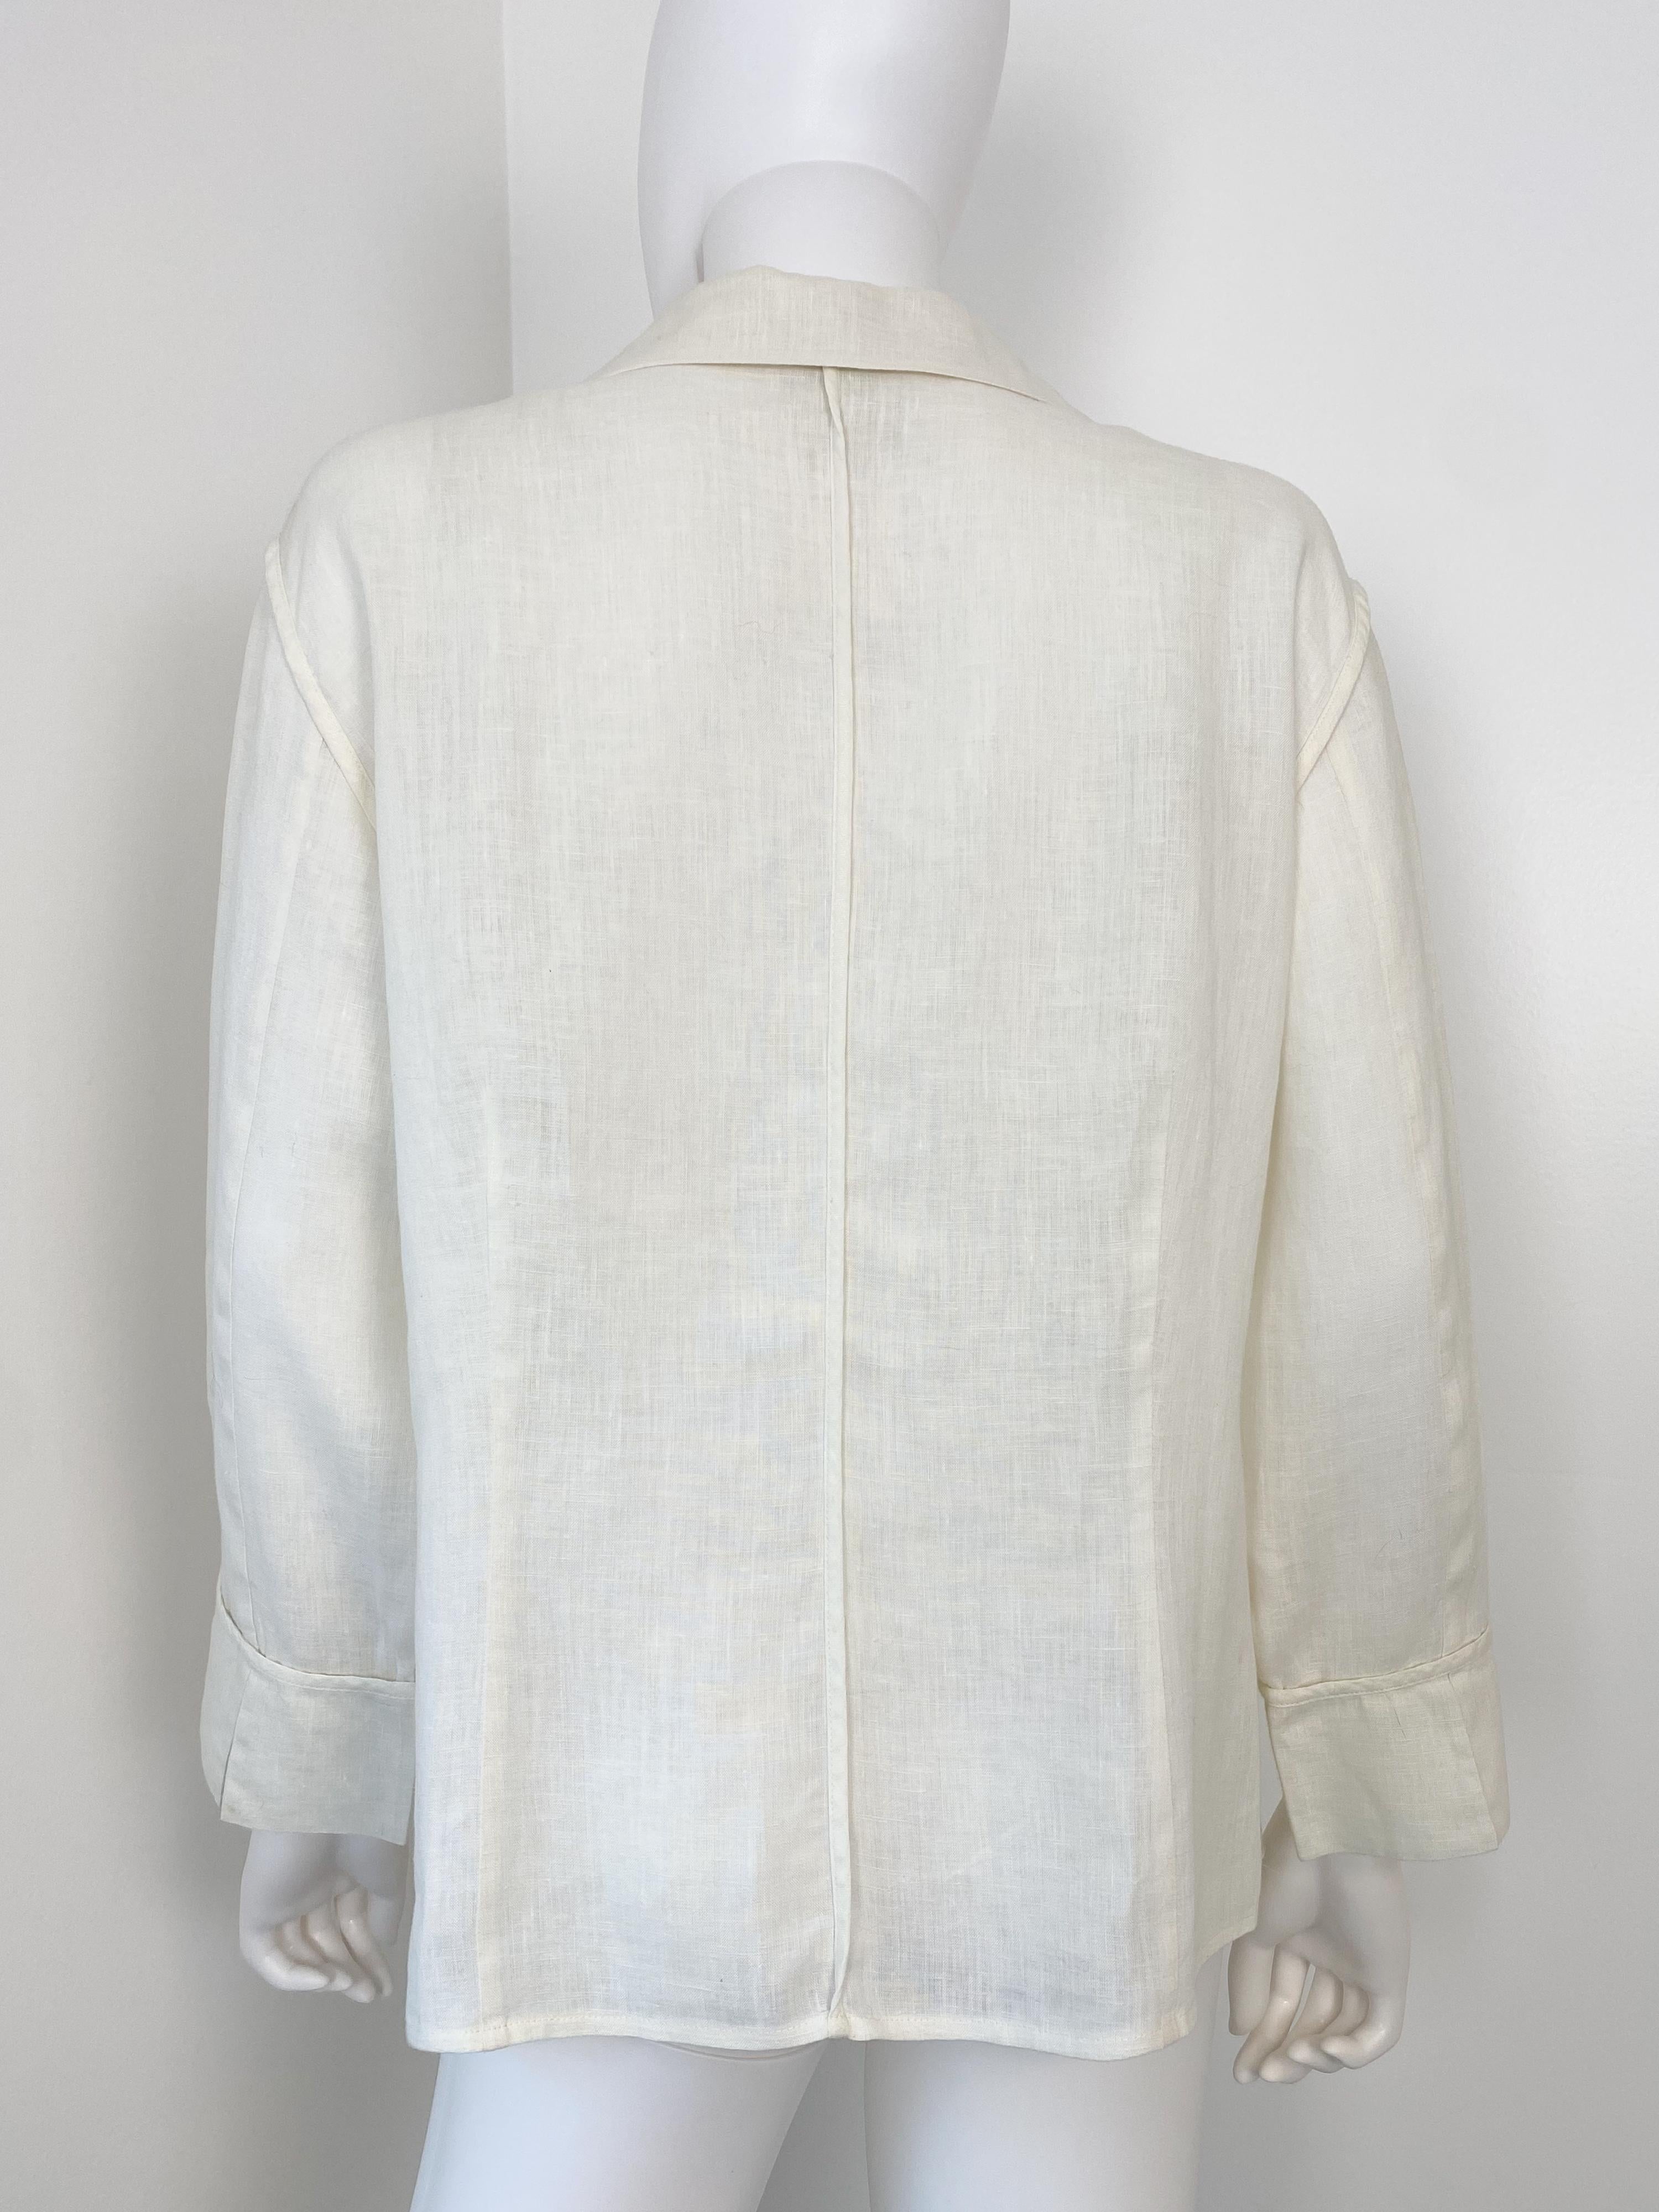 Vintage 1990s Louis Feraud Linen and Cotton Blouse Top with Embroidery Size L For Sale 5